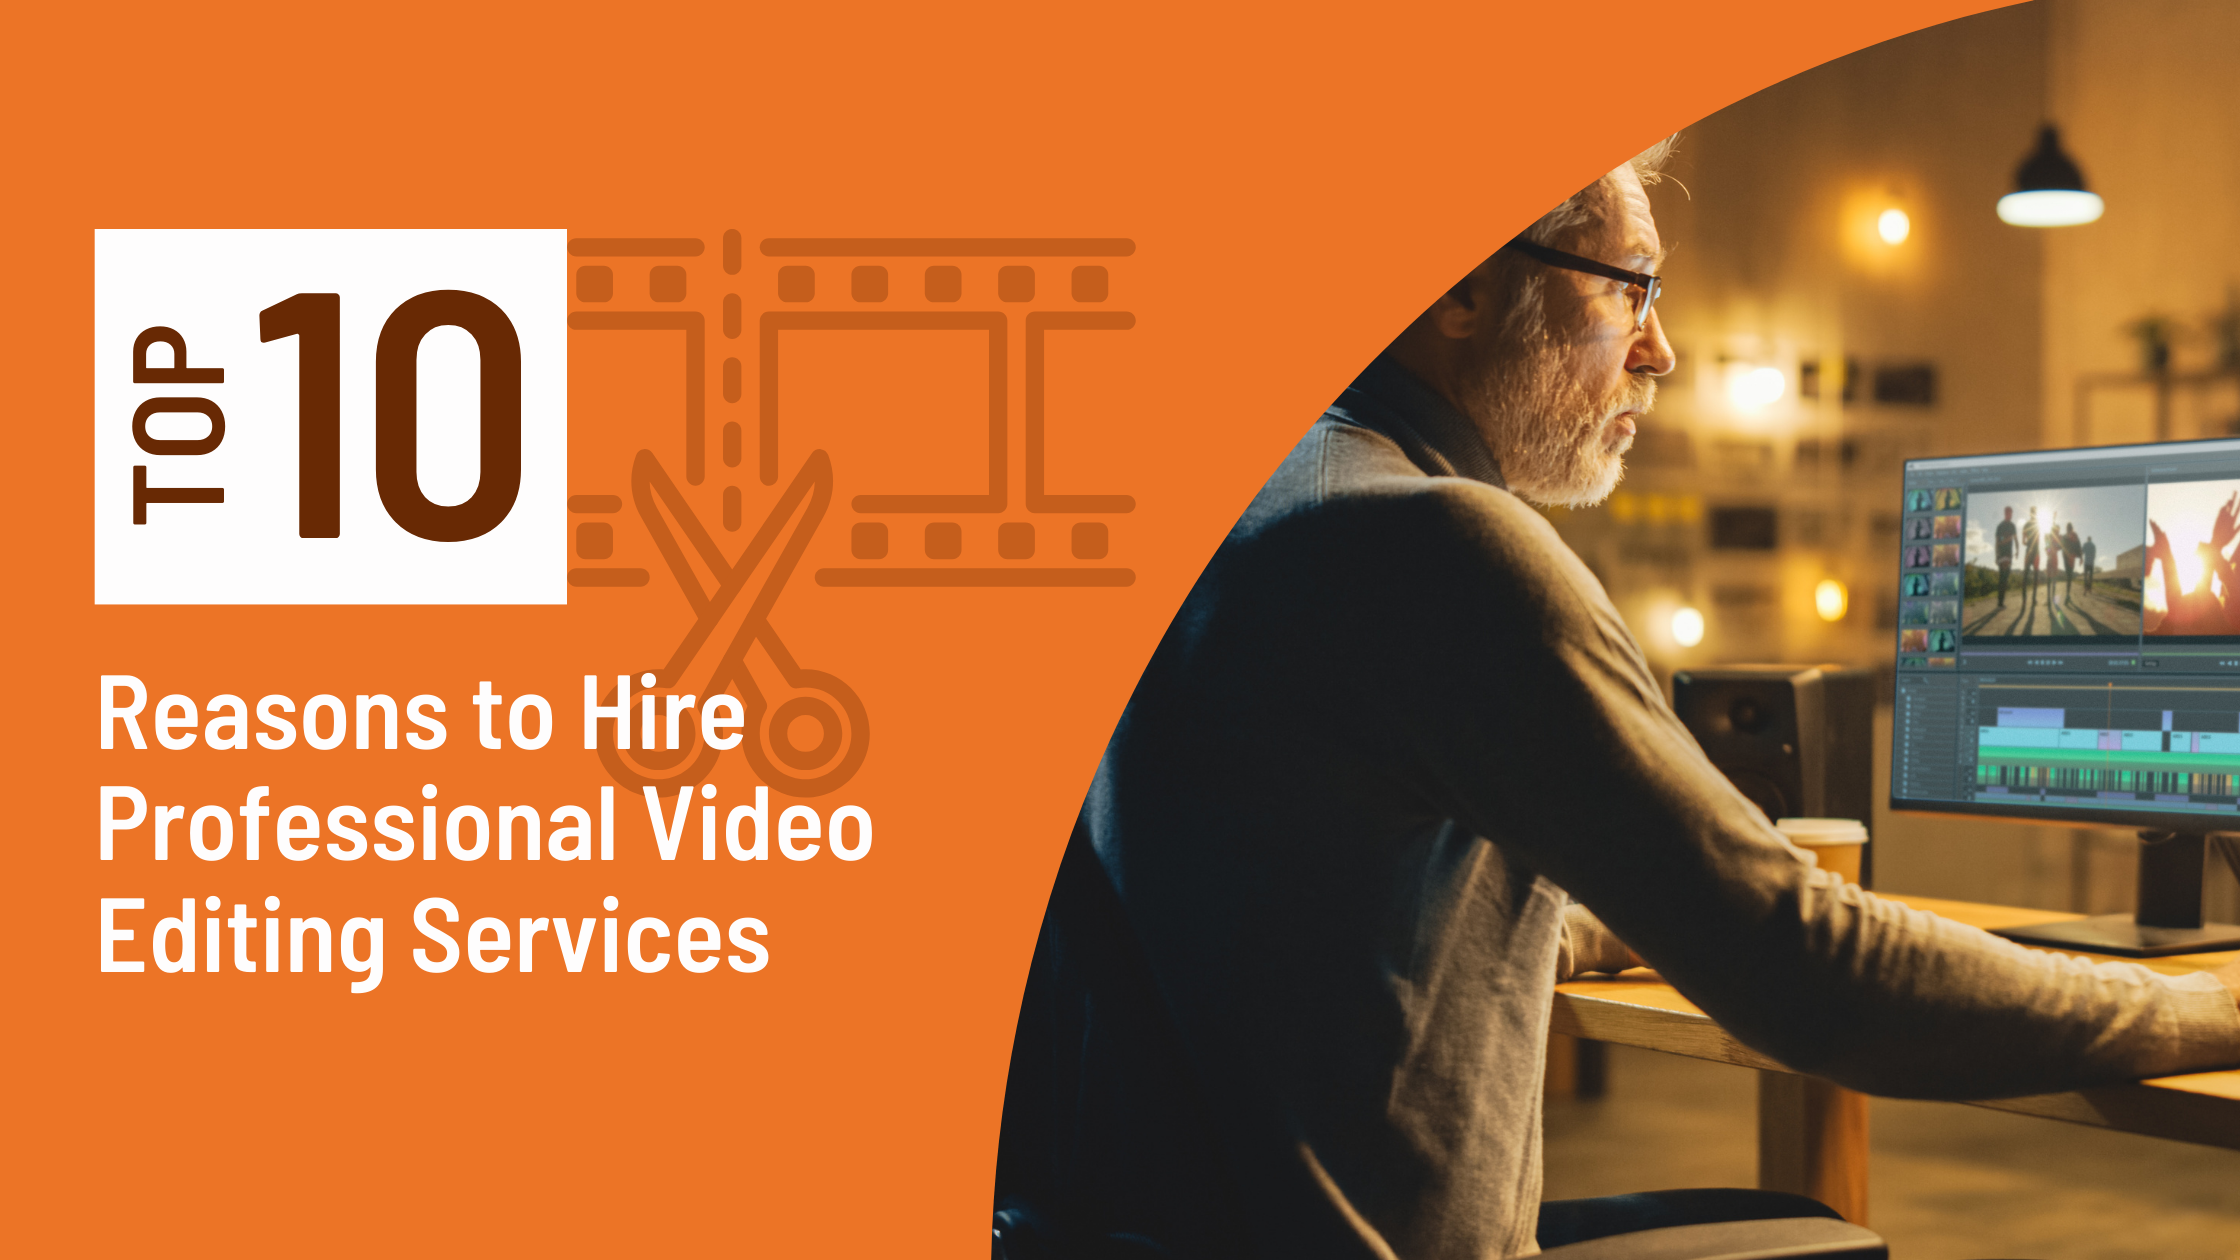 Top 10 Reasons to Hire Professional Video Editing Services